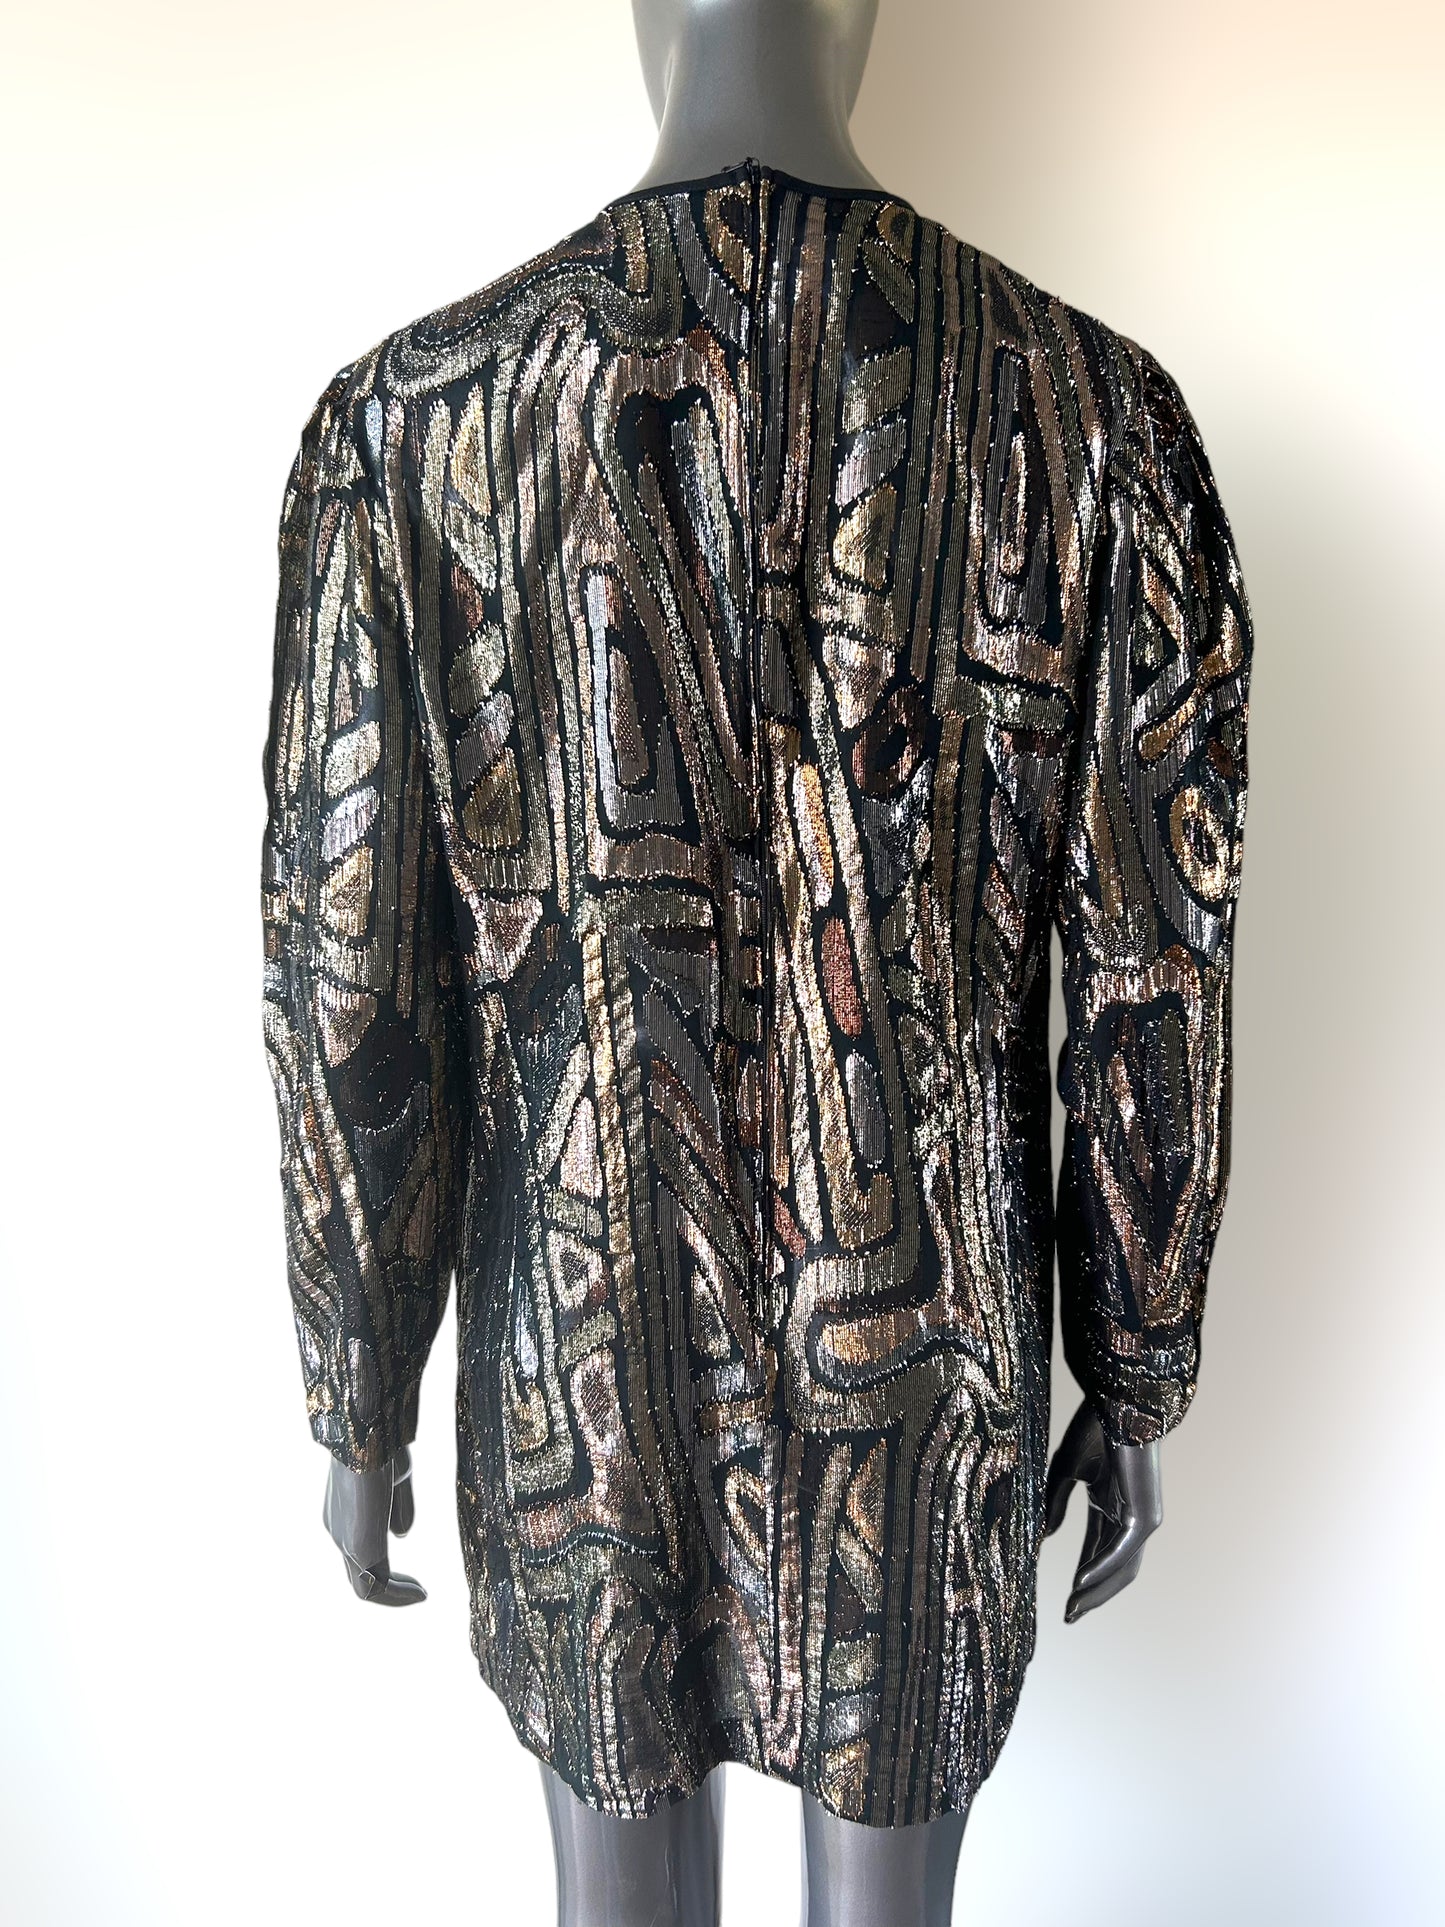 Vintage 1980s French Lame Metallic Tunic in hues of Gold, Silver and Bronze